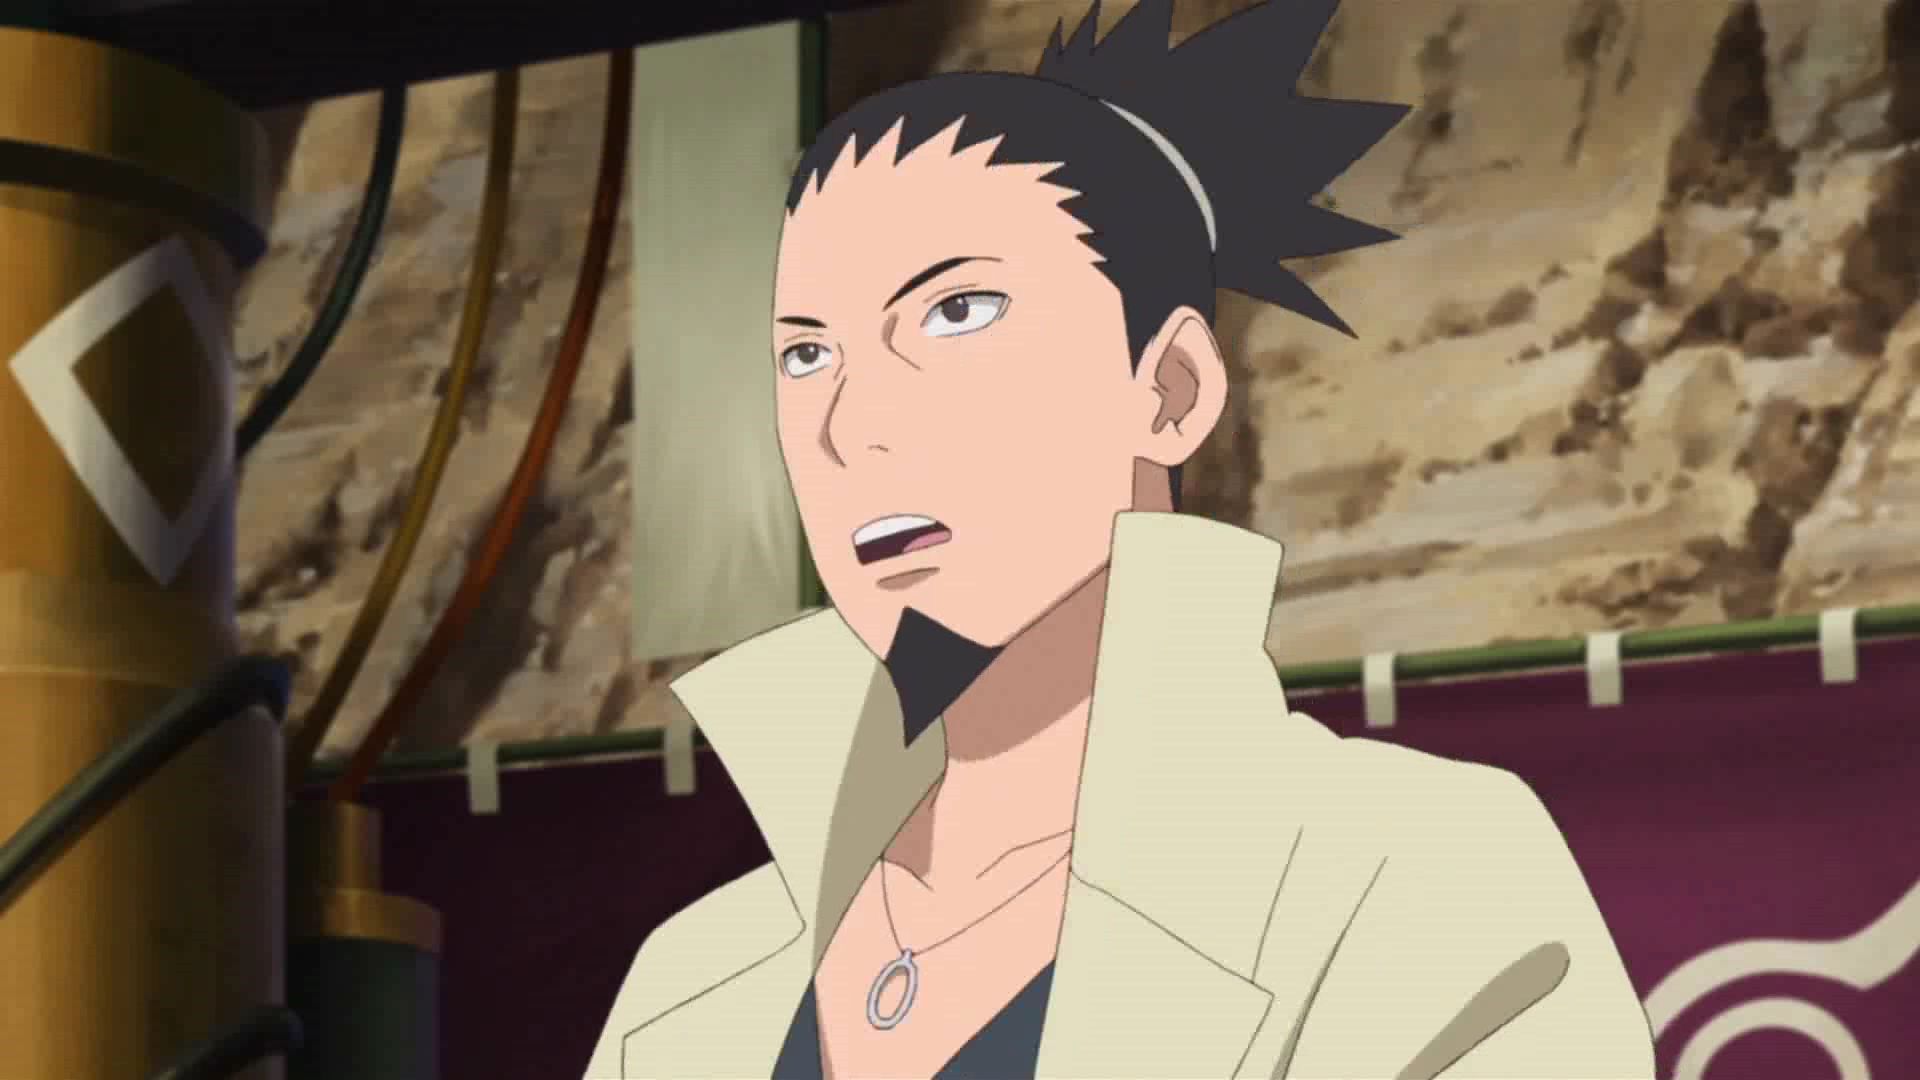 Screenshot from Boruto anime shows Shikamaru getting ready to speak to a group of students while standing in front of a Konoha banner.